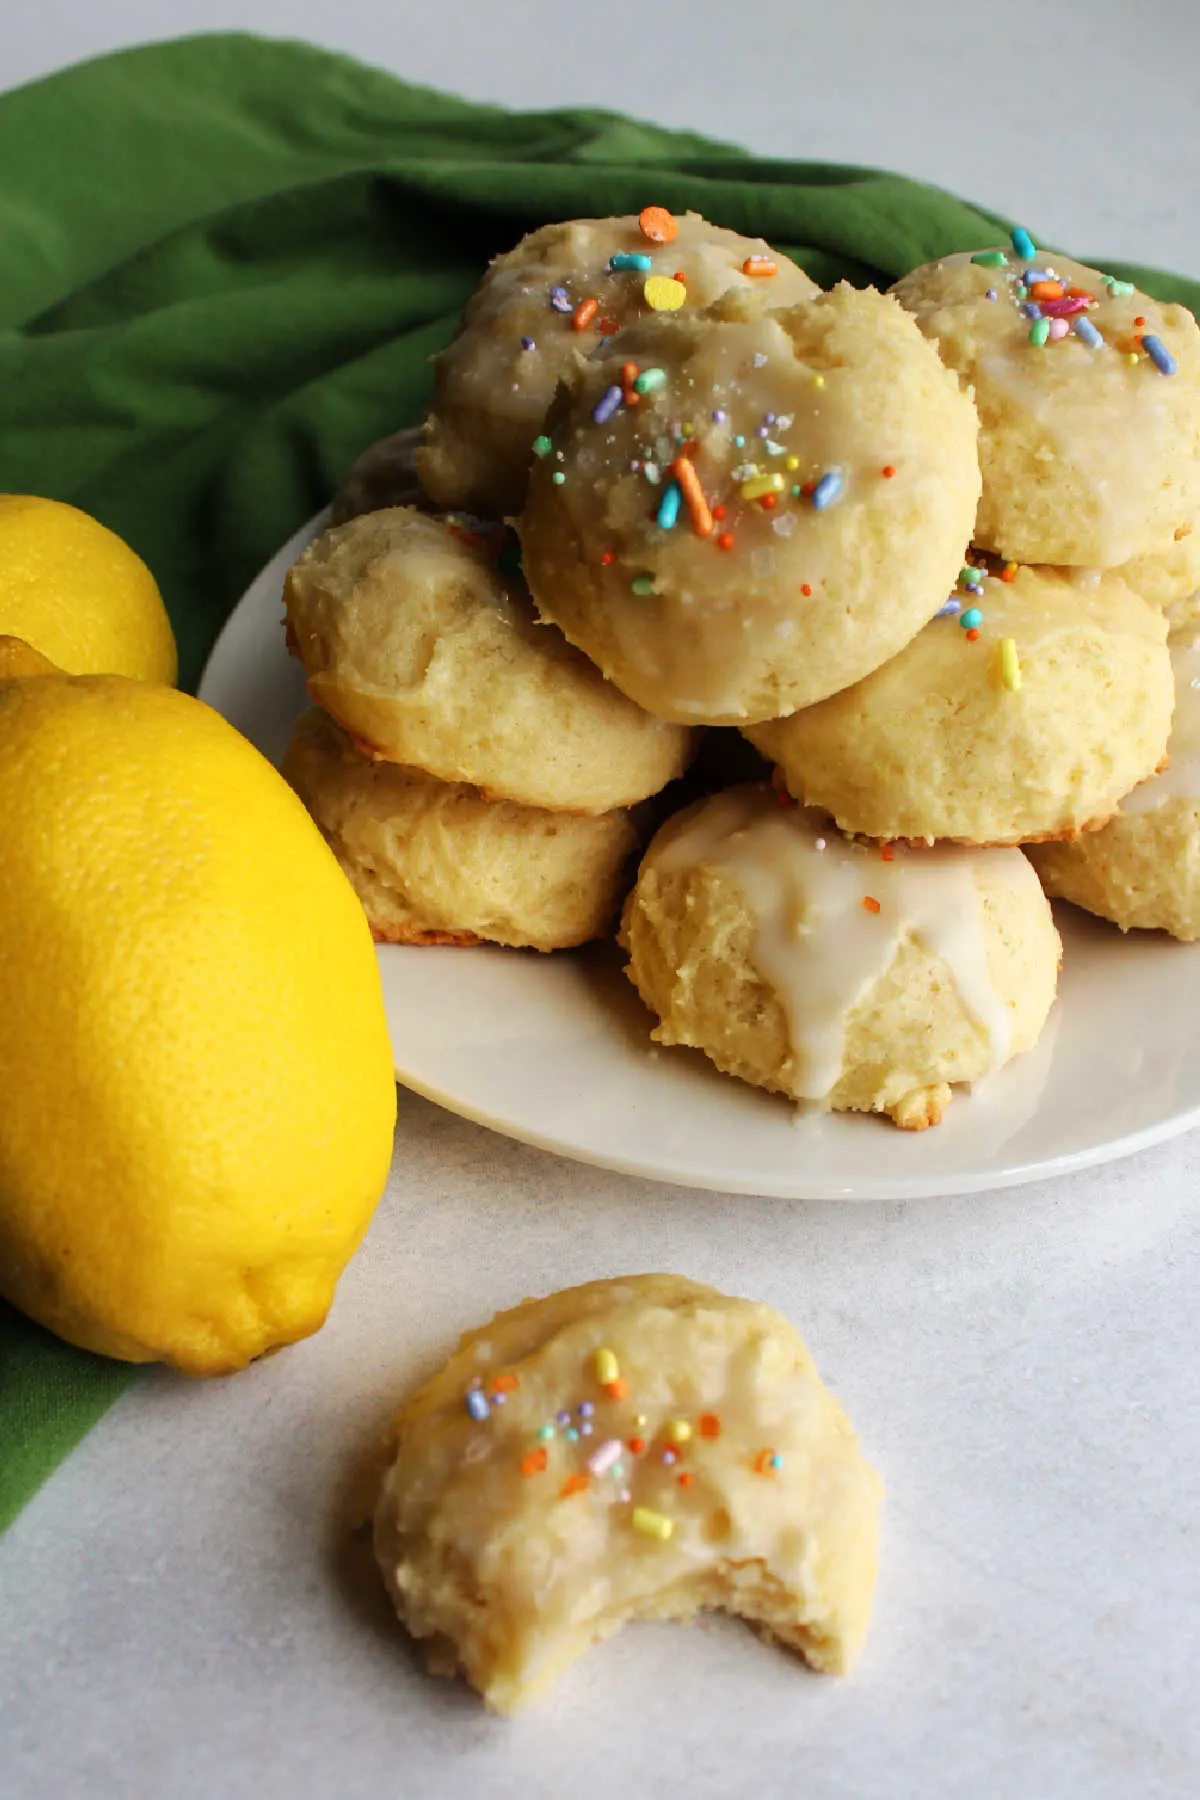 Pile of pillowy lemon cookies topped with white icing and sprinkles.